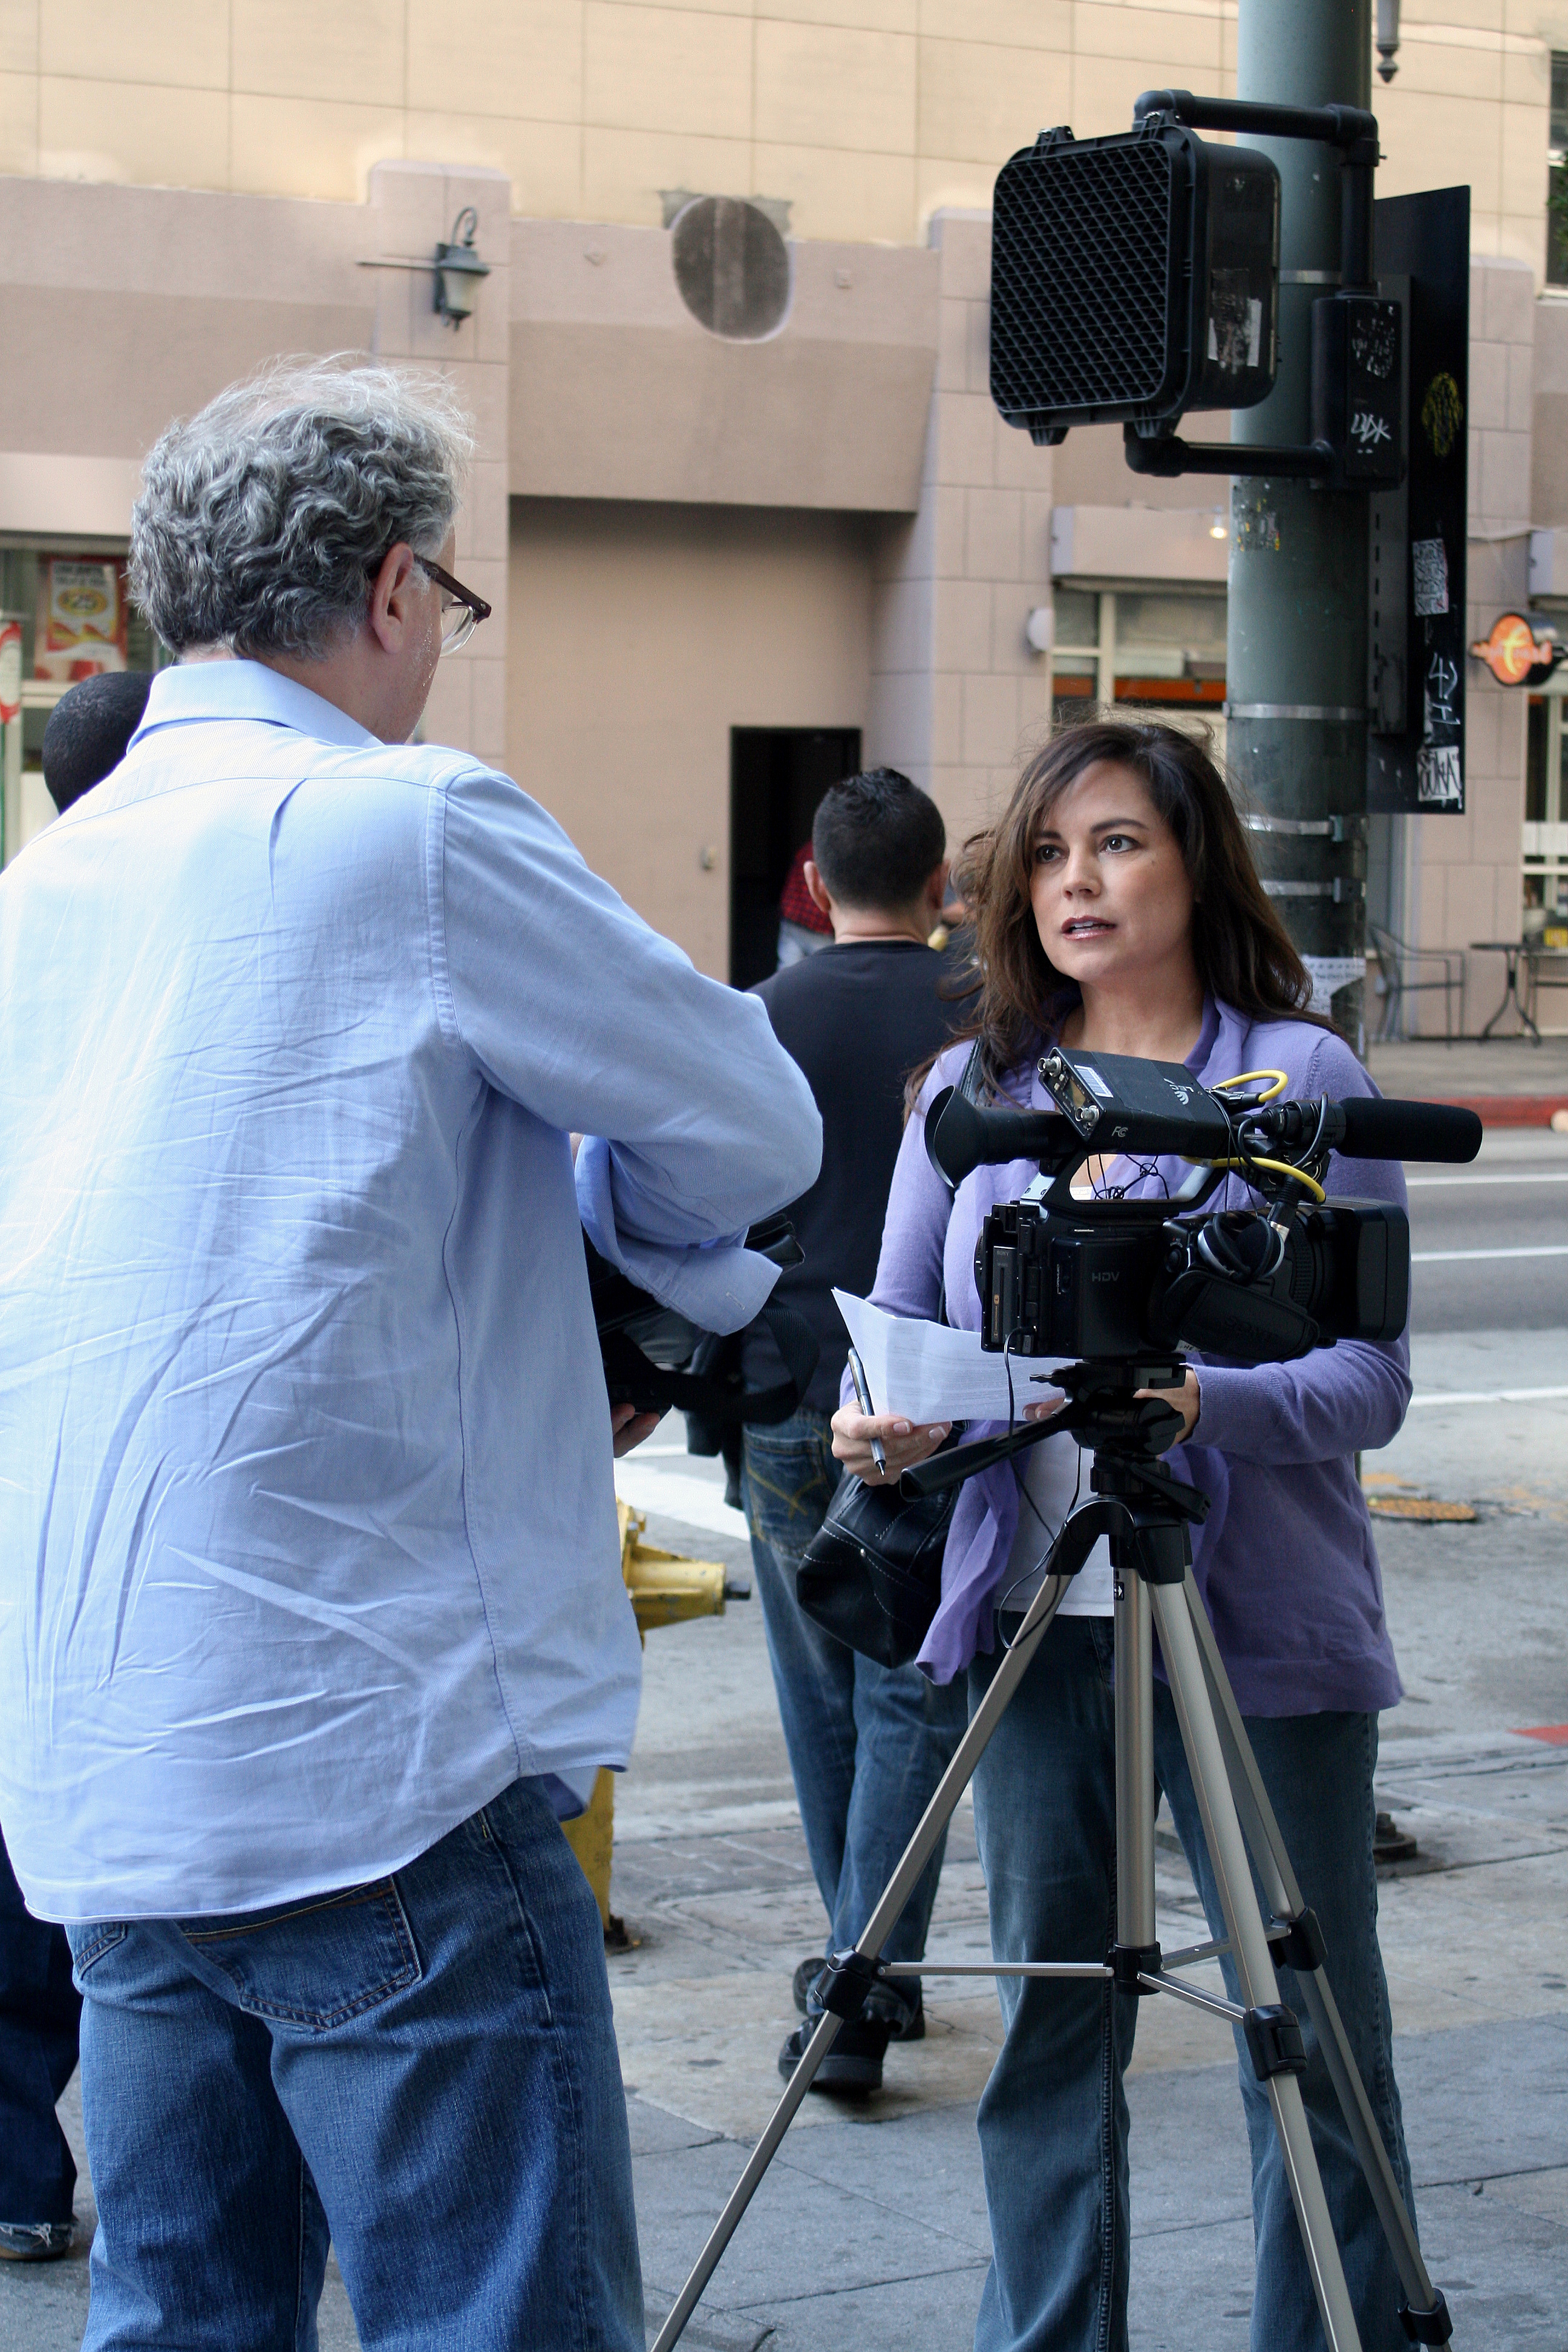 On street reporting